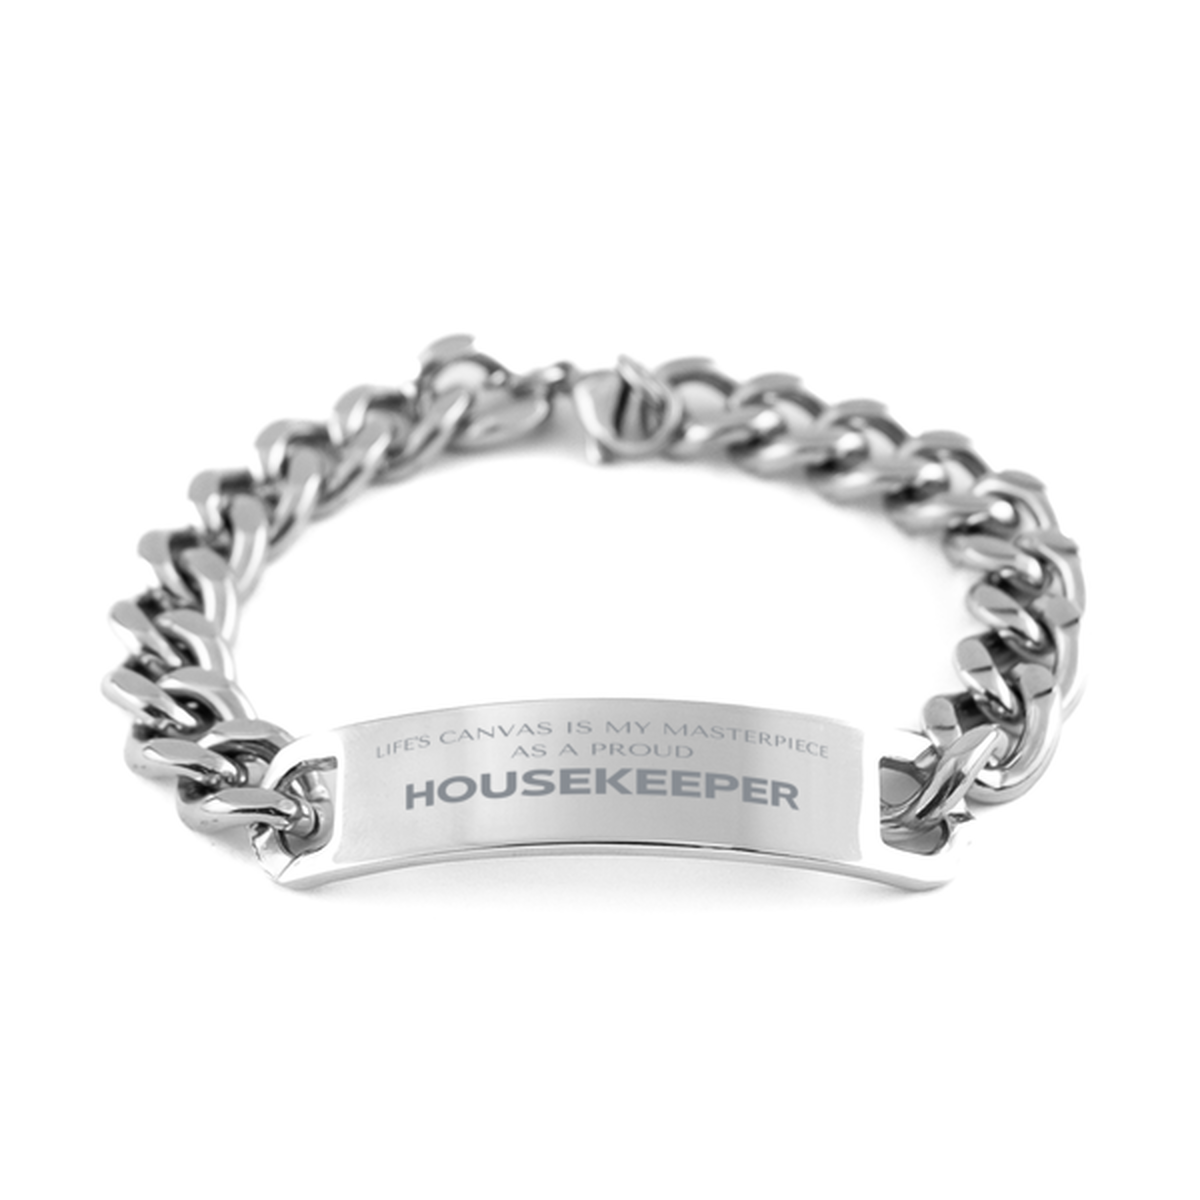 Proud Housekeeper Gifts, Life's canvas is my masterpiece, Epic Birthday Christmas Unique Cuban Chain Stainless Steel Bracelet For Housekeeper, Coworkers, Men, Women, Friends